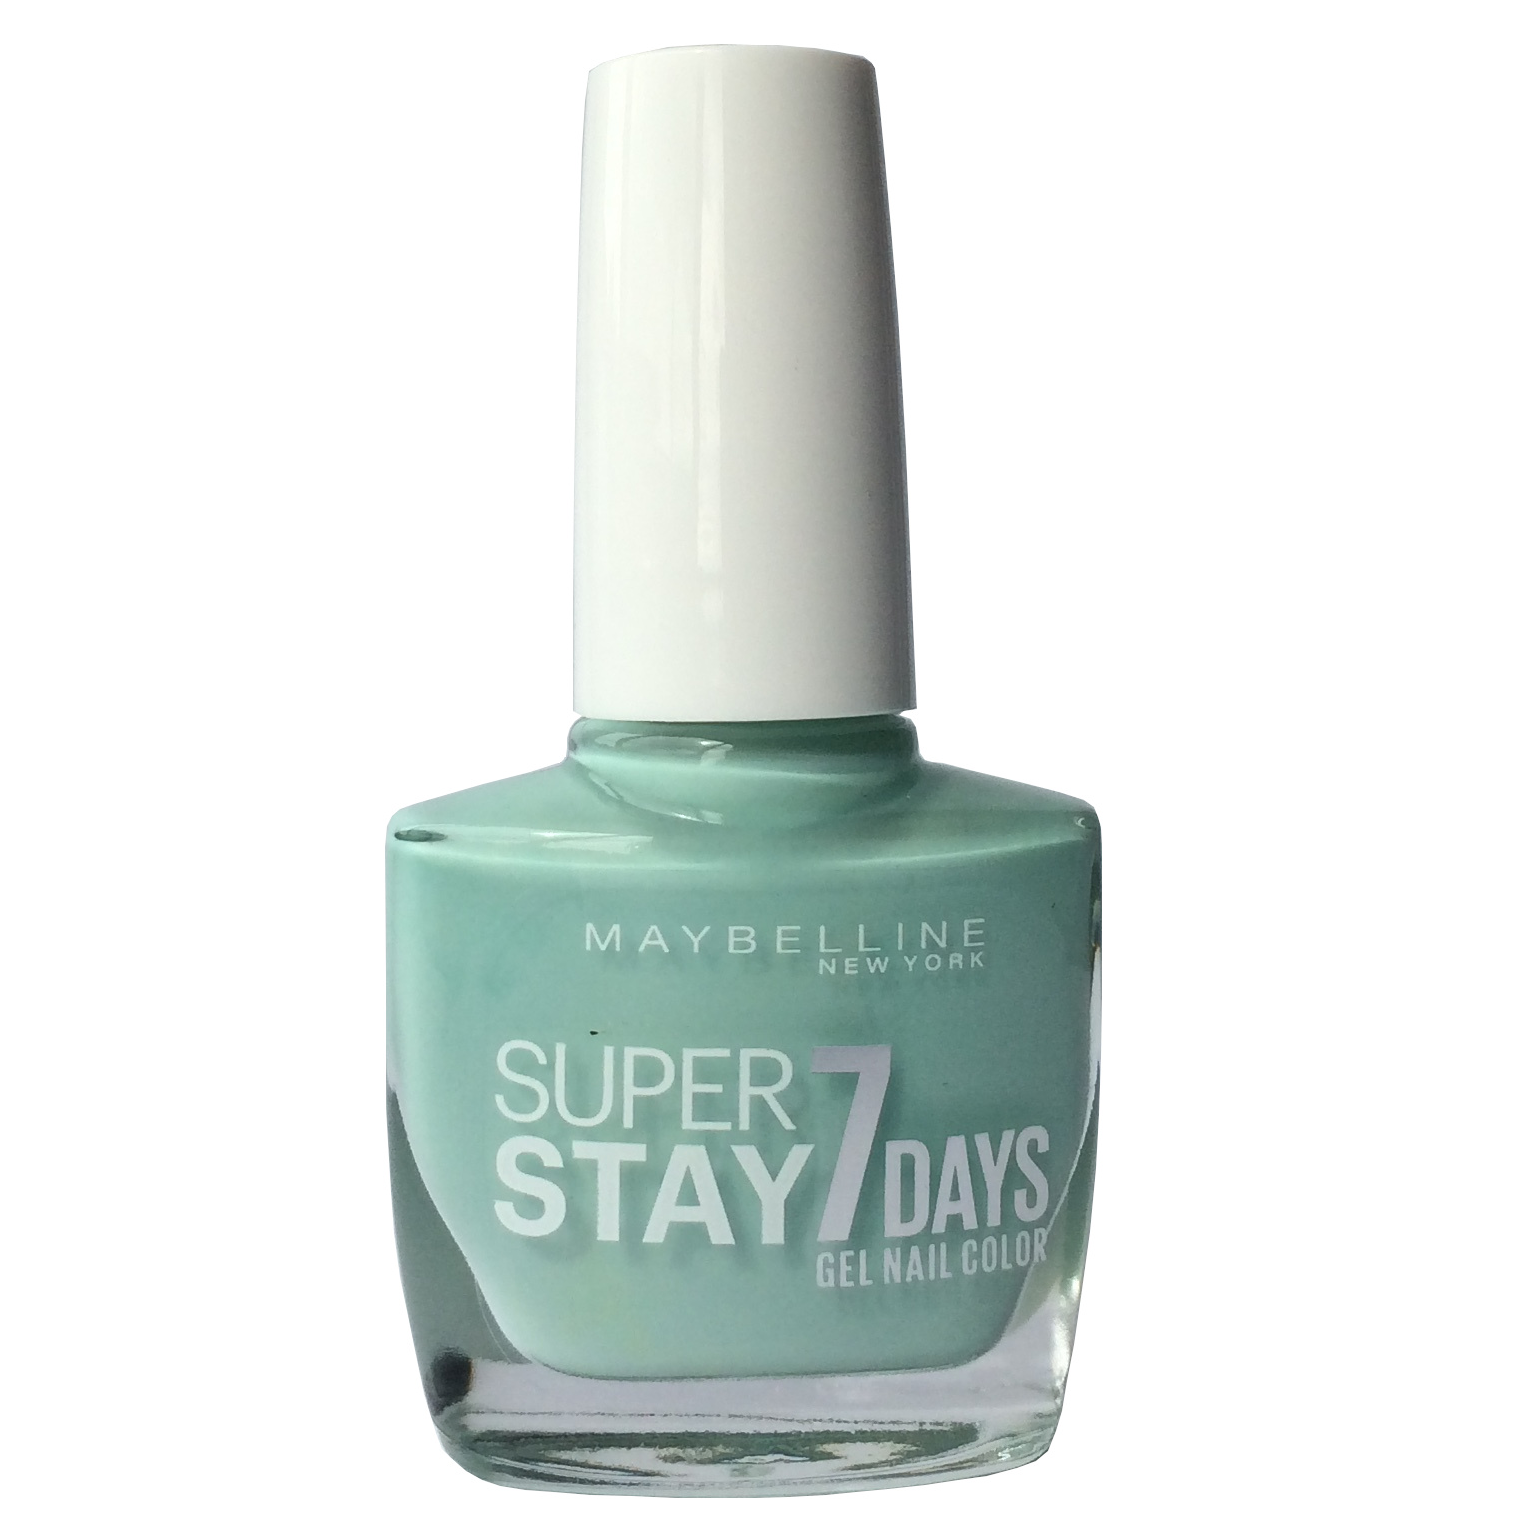 Maybelline Superstay 7 Days Gel Nail Polish 915 Turquoise & Tango